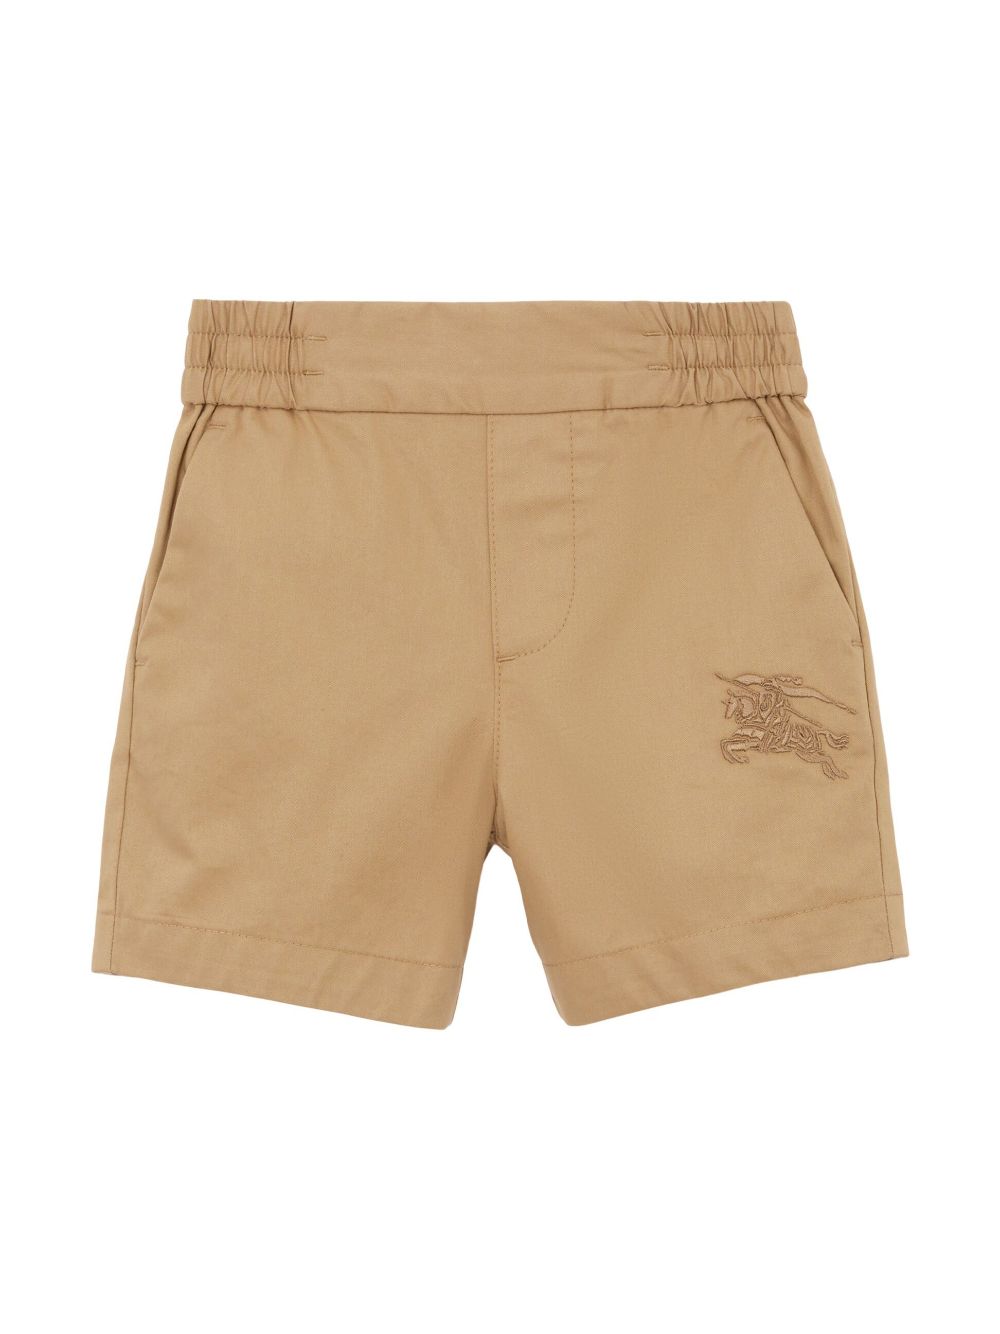 Burberry Kids embroidered cotton chino shorts - ARCHIVE BEIGE